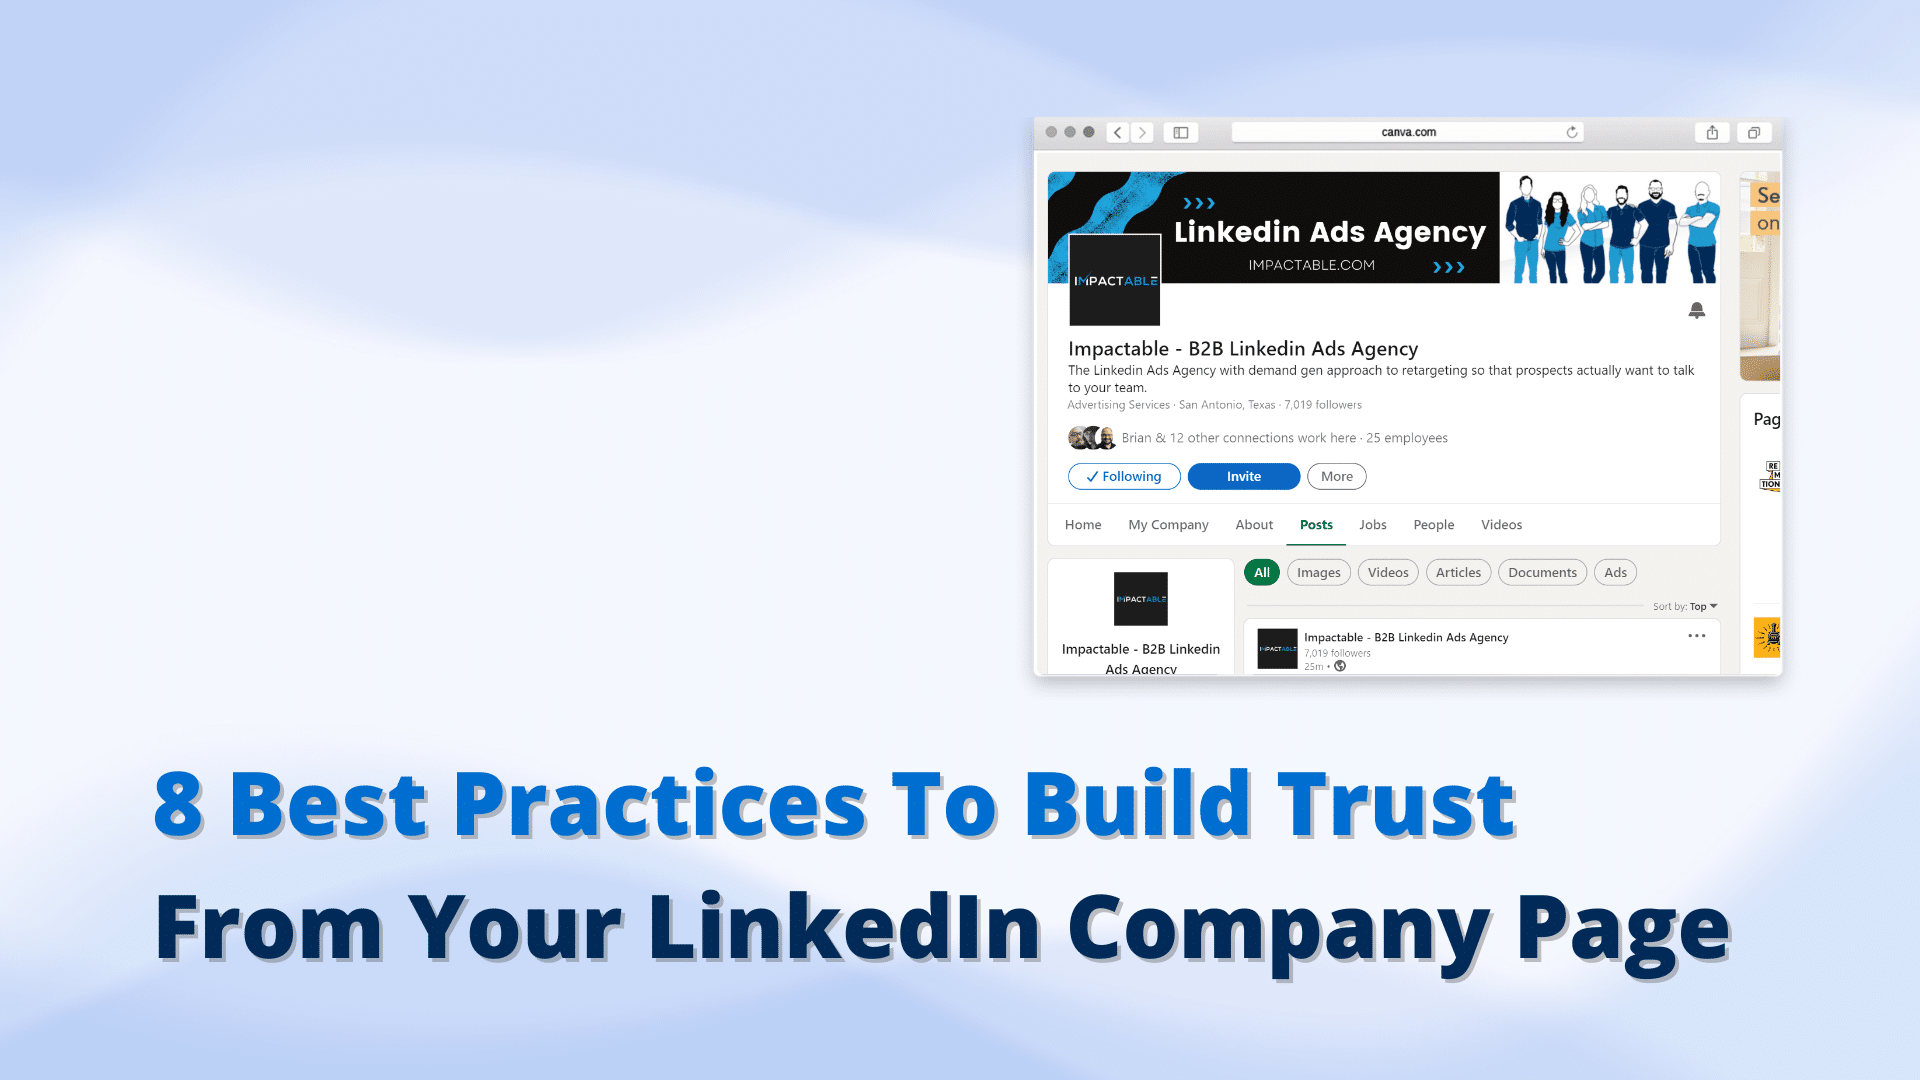 Linkedin company page best practices